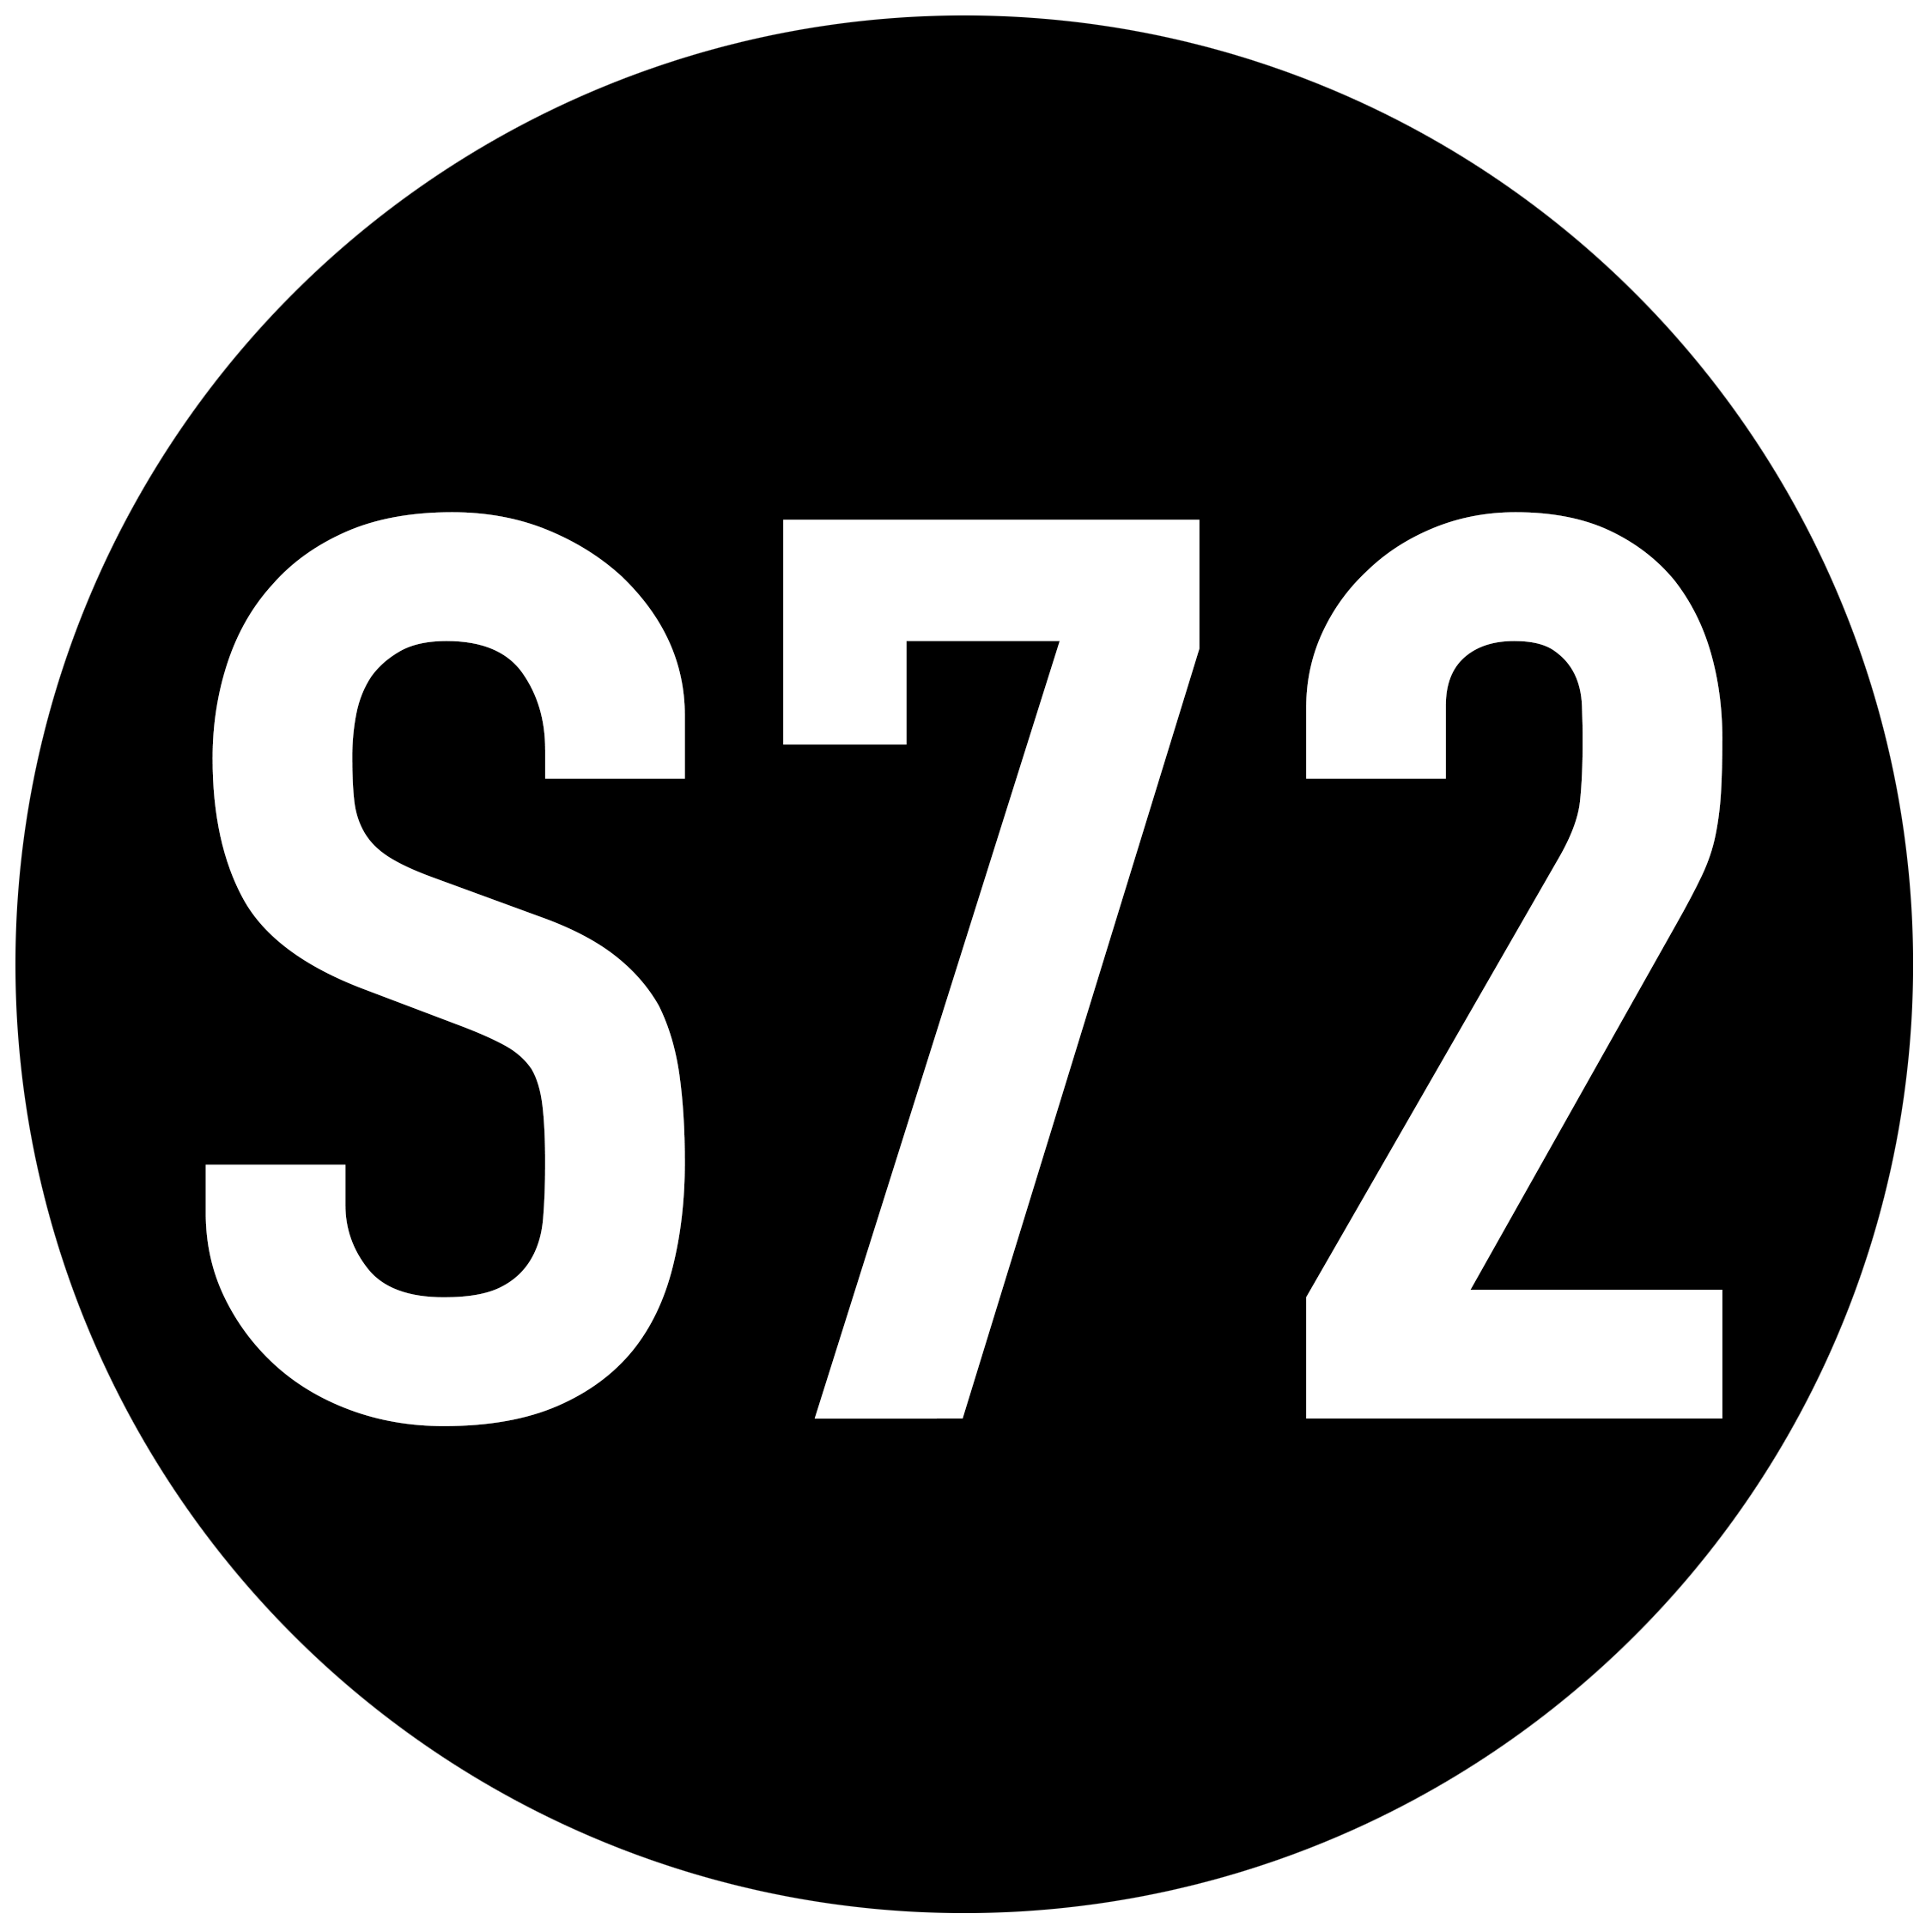 Business logo of S72 Business Portraits